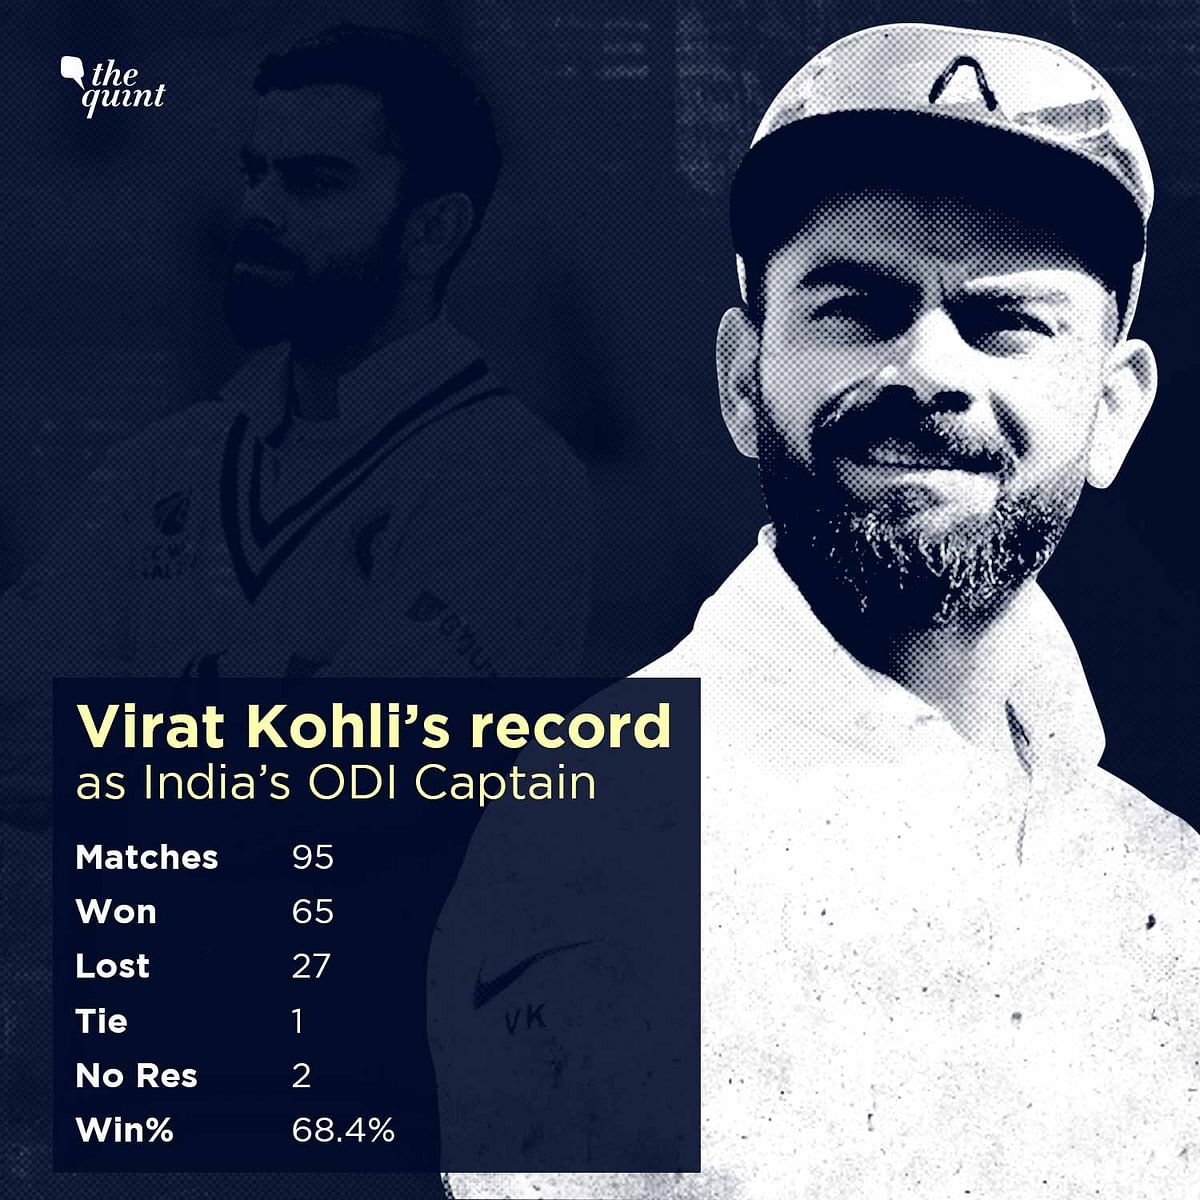 In a format that's been played since 1877, Kohli ends his tenure among the top four captains in Test cricket.